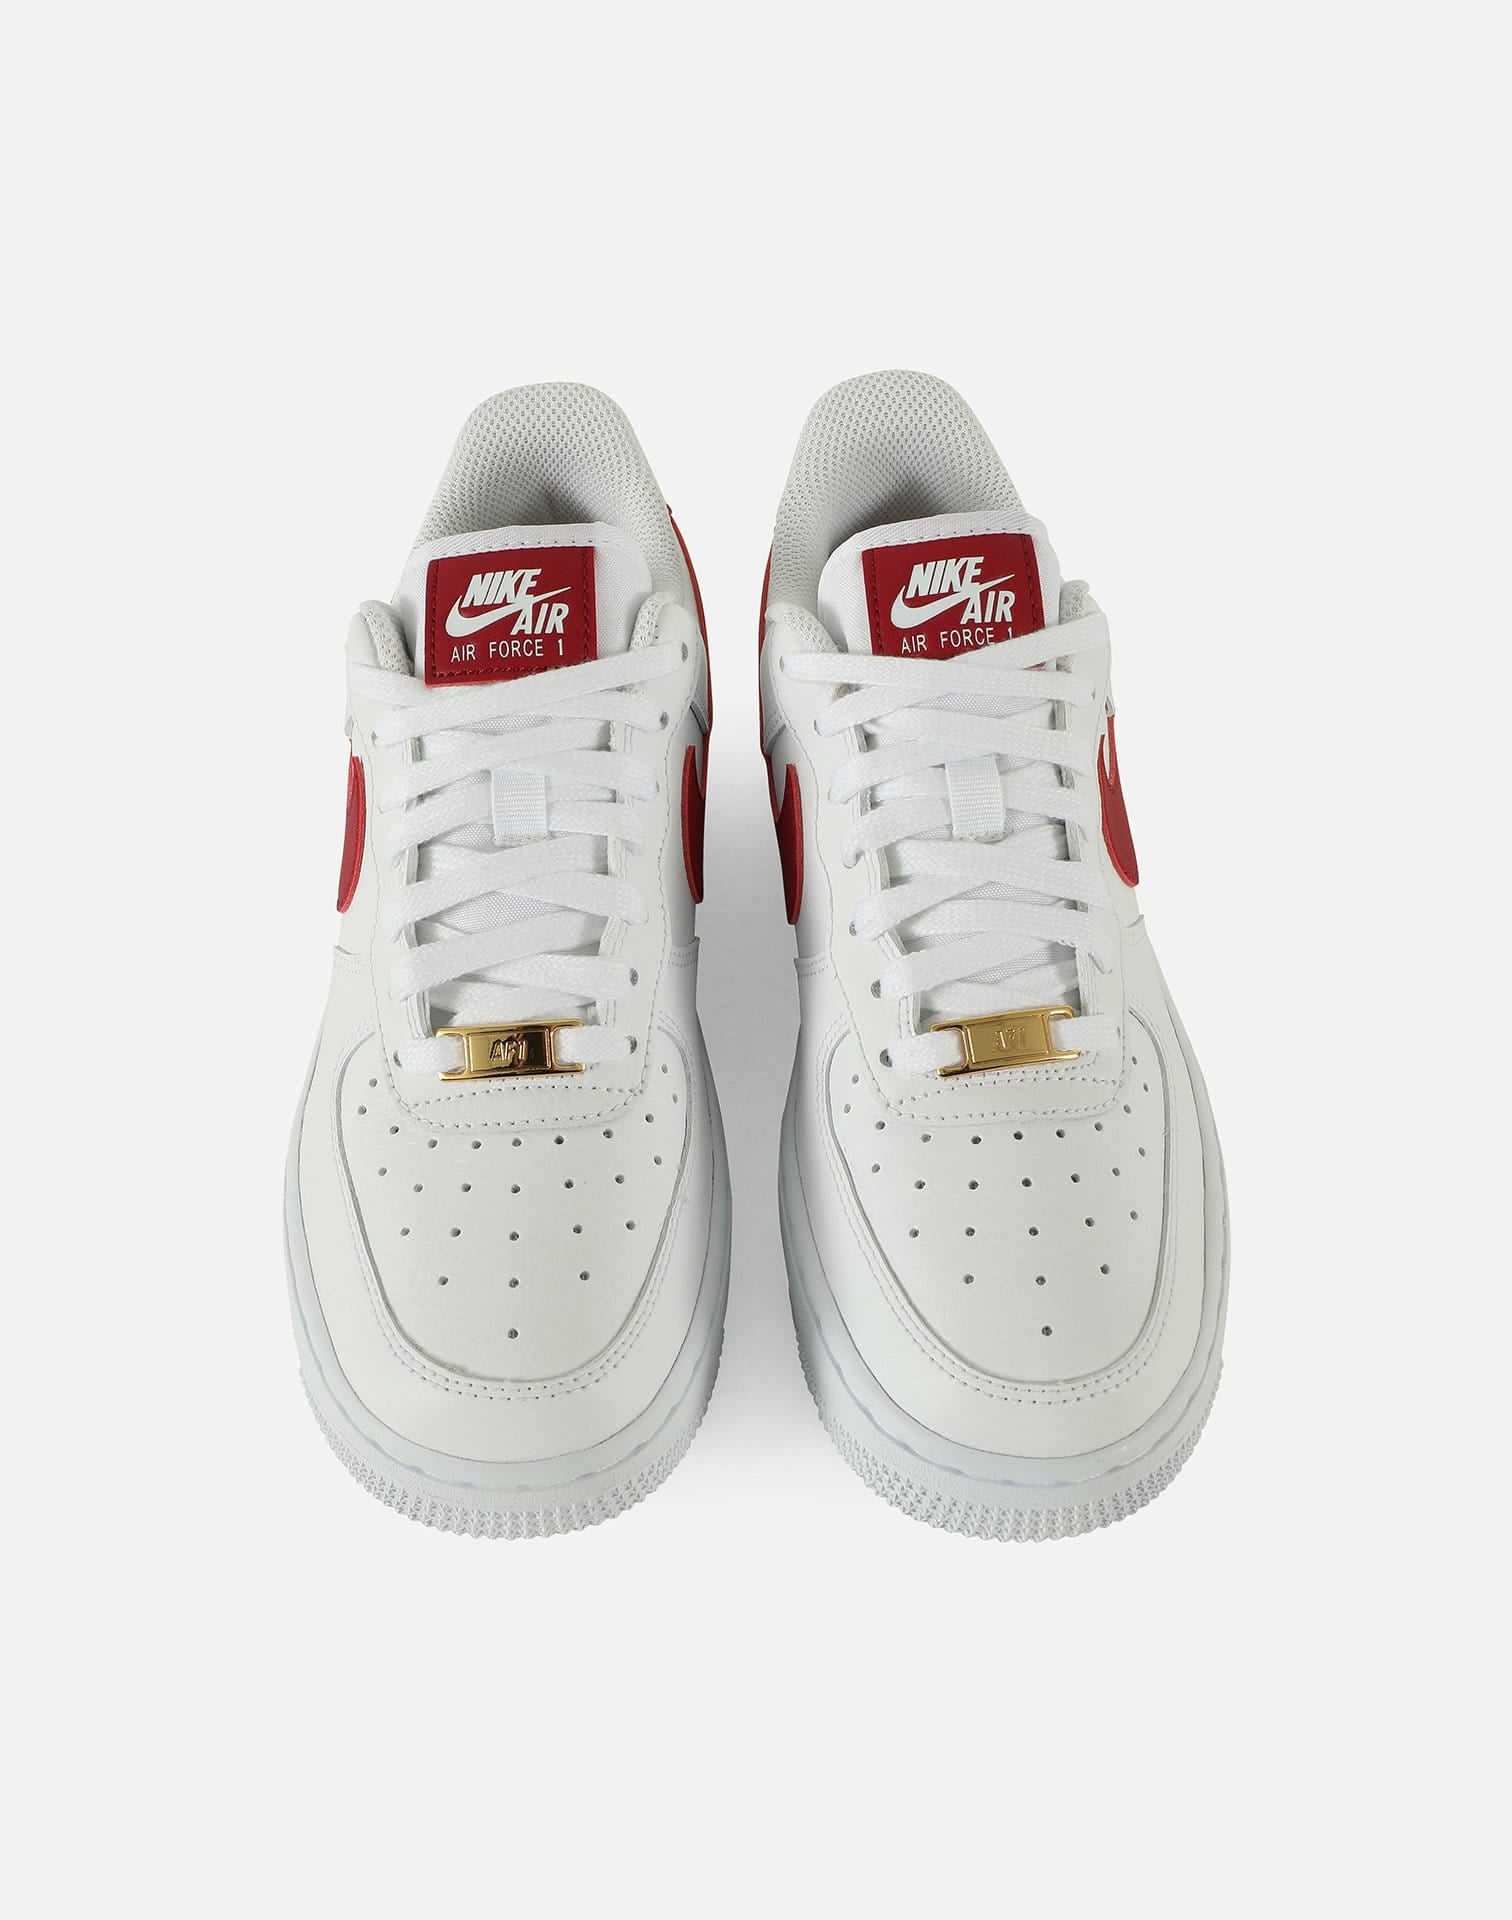 dtlr air force ones